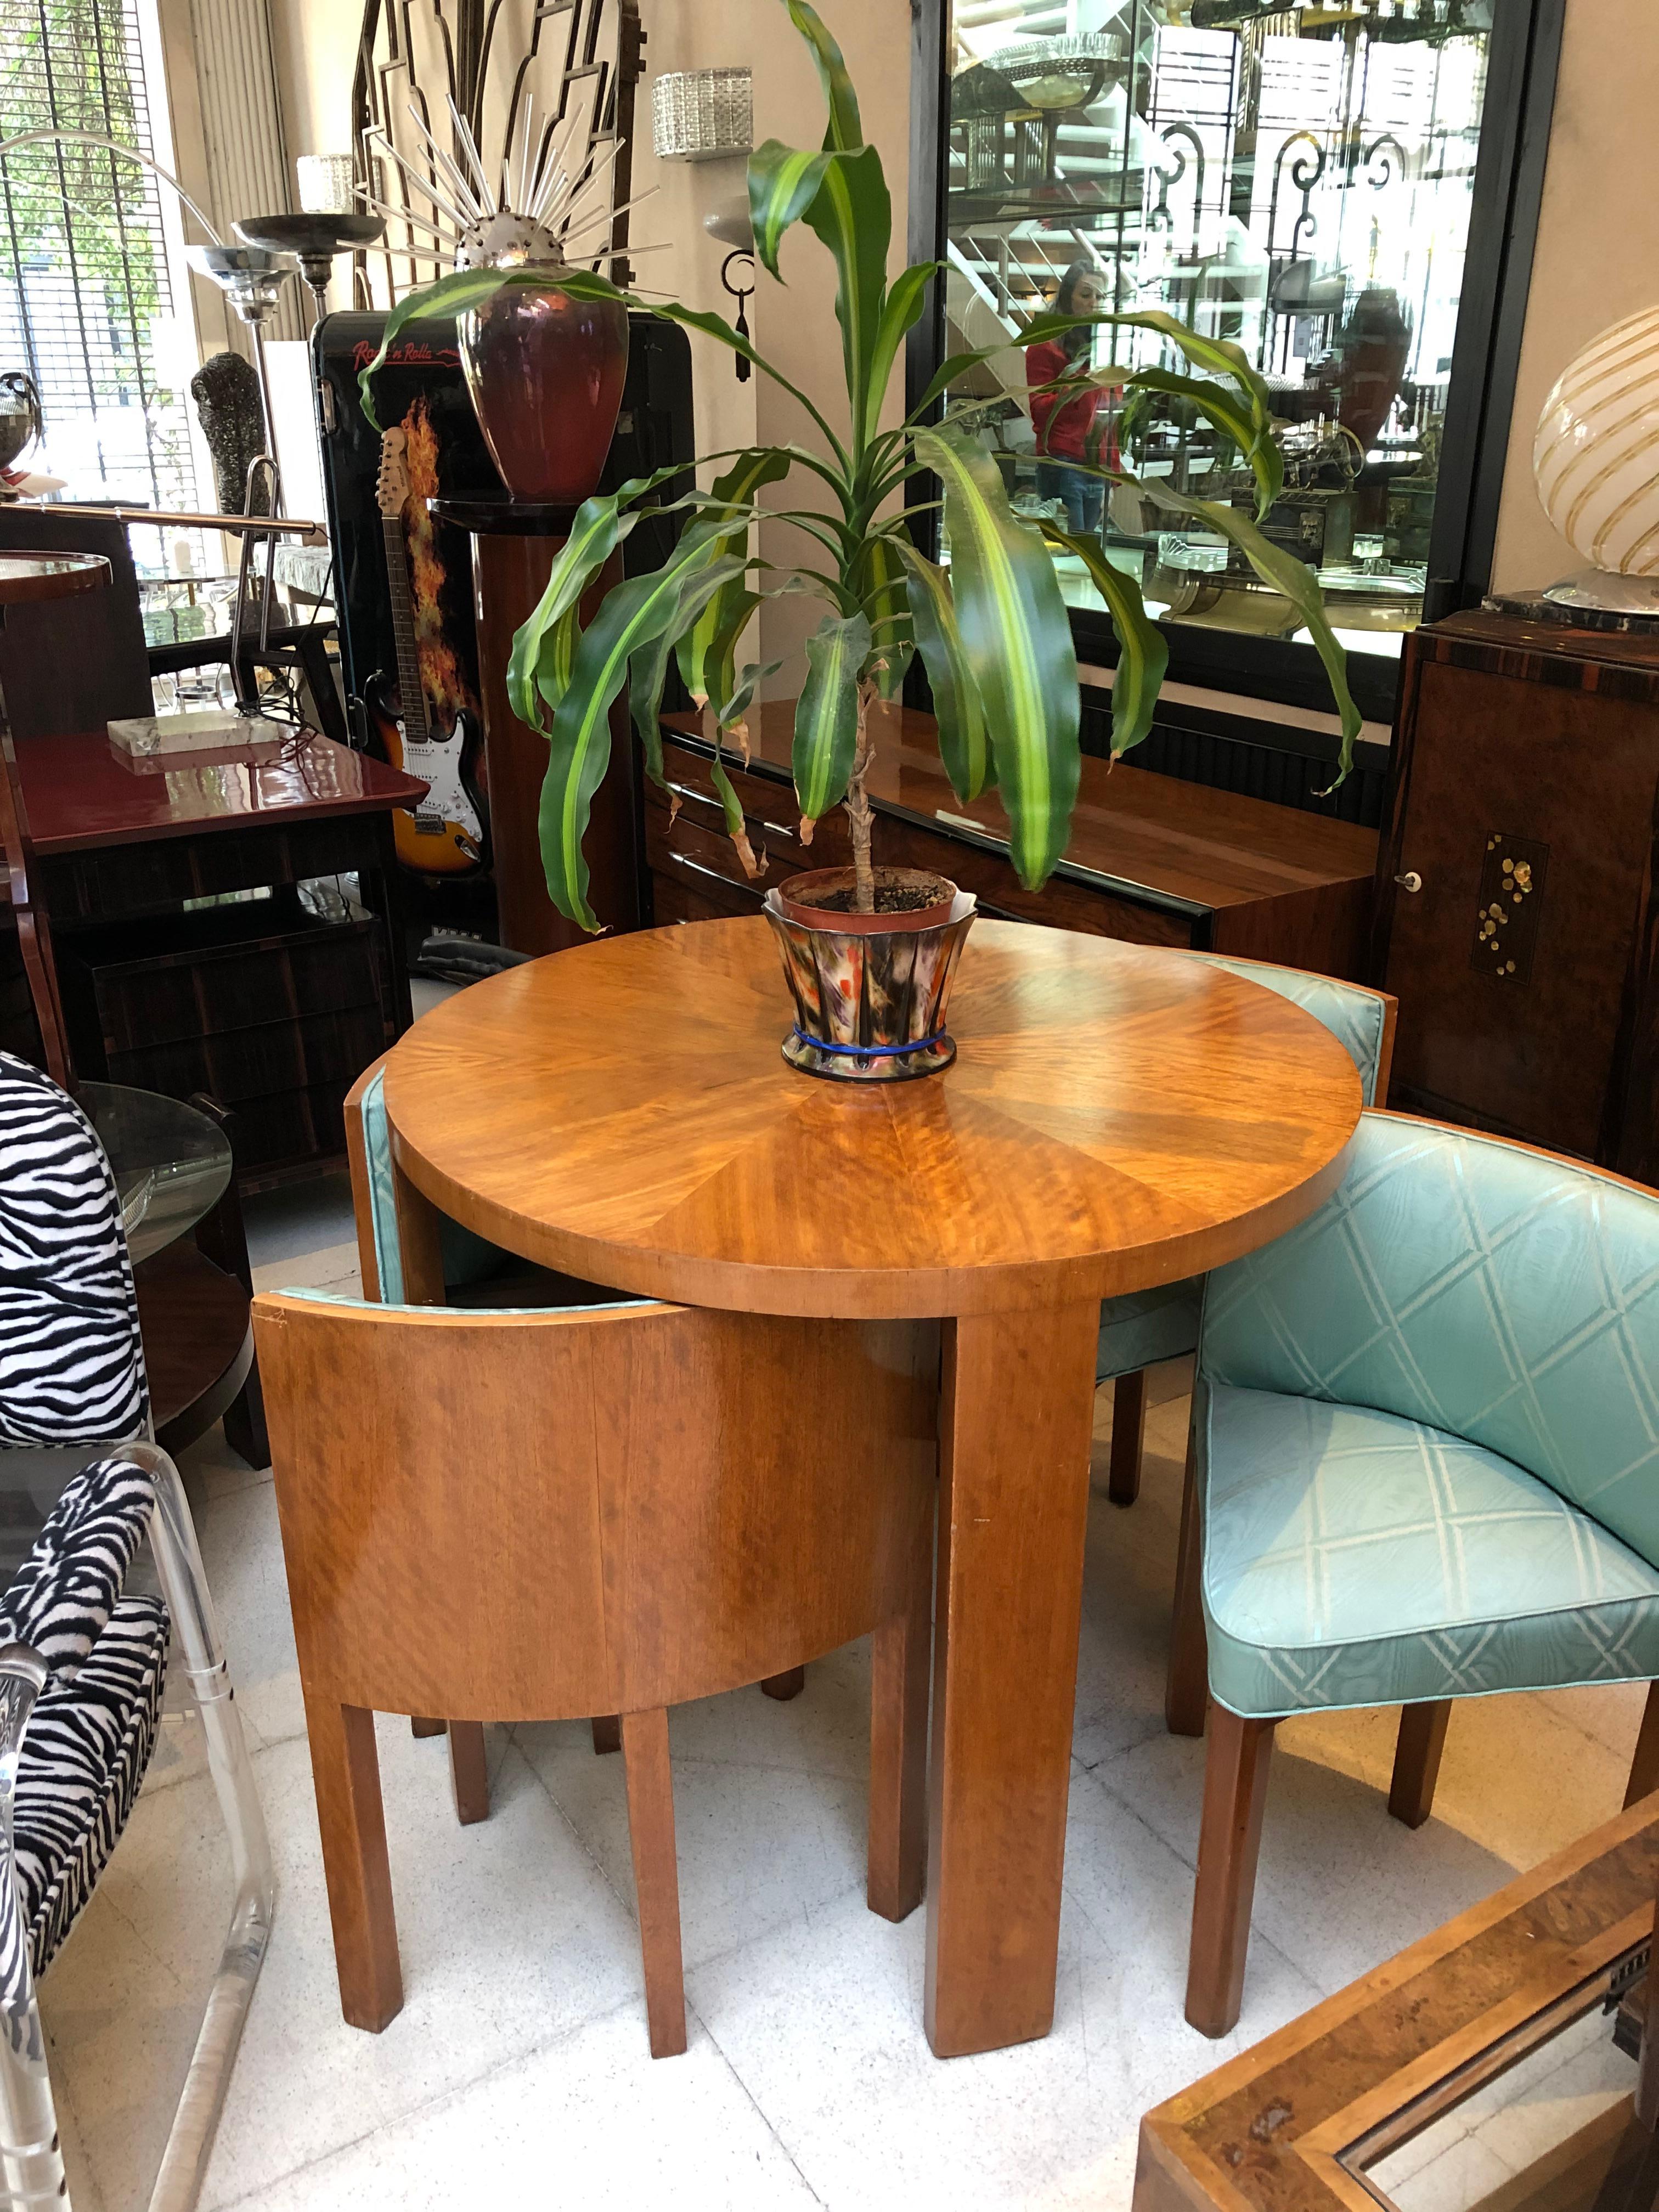 Ceramic
We have specialized in the sale of Art Deco and Art Nouveau and Vintage styles since 1982. If you have any questions we are at your disposal.
Pushing the button that reads 'View All From Seller'. And you can see more objects to the style